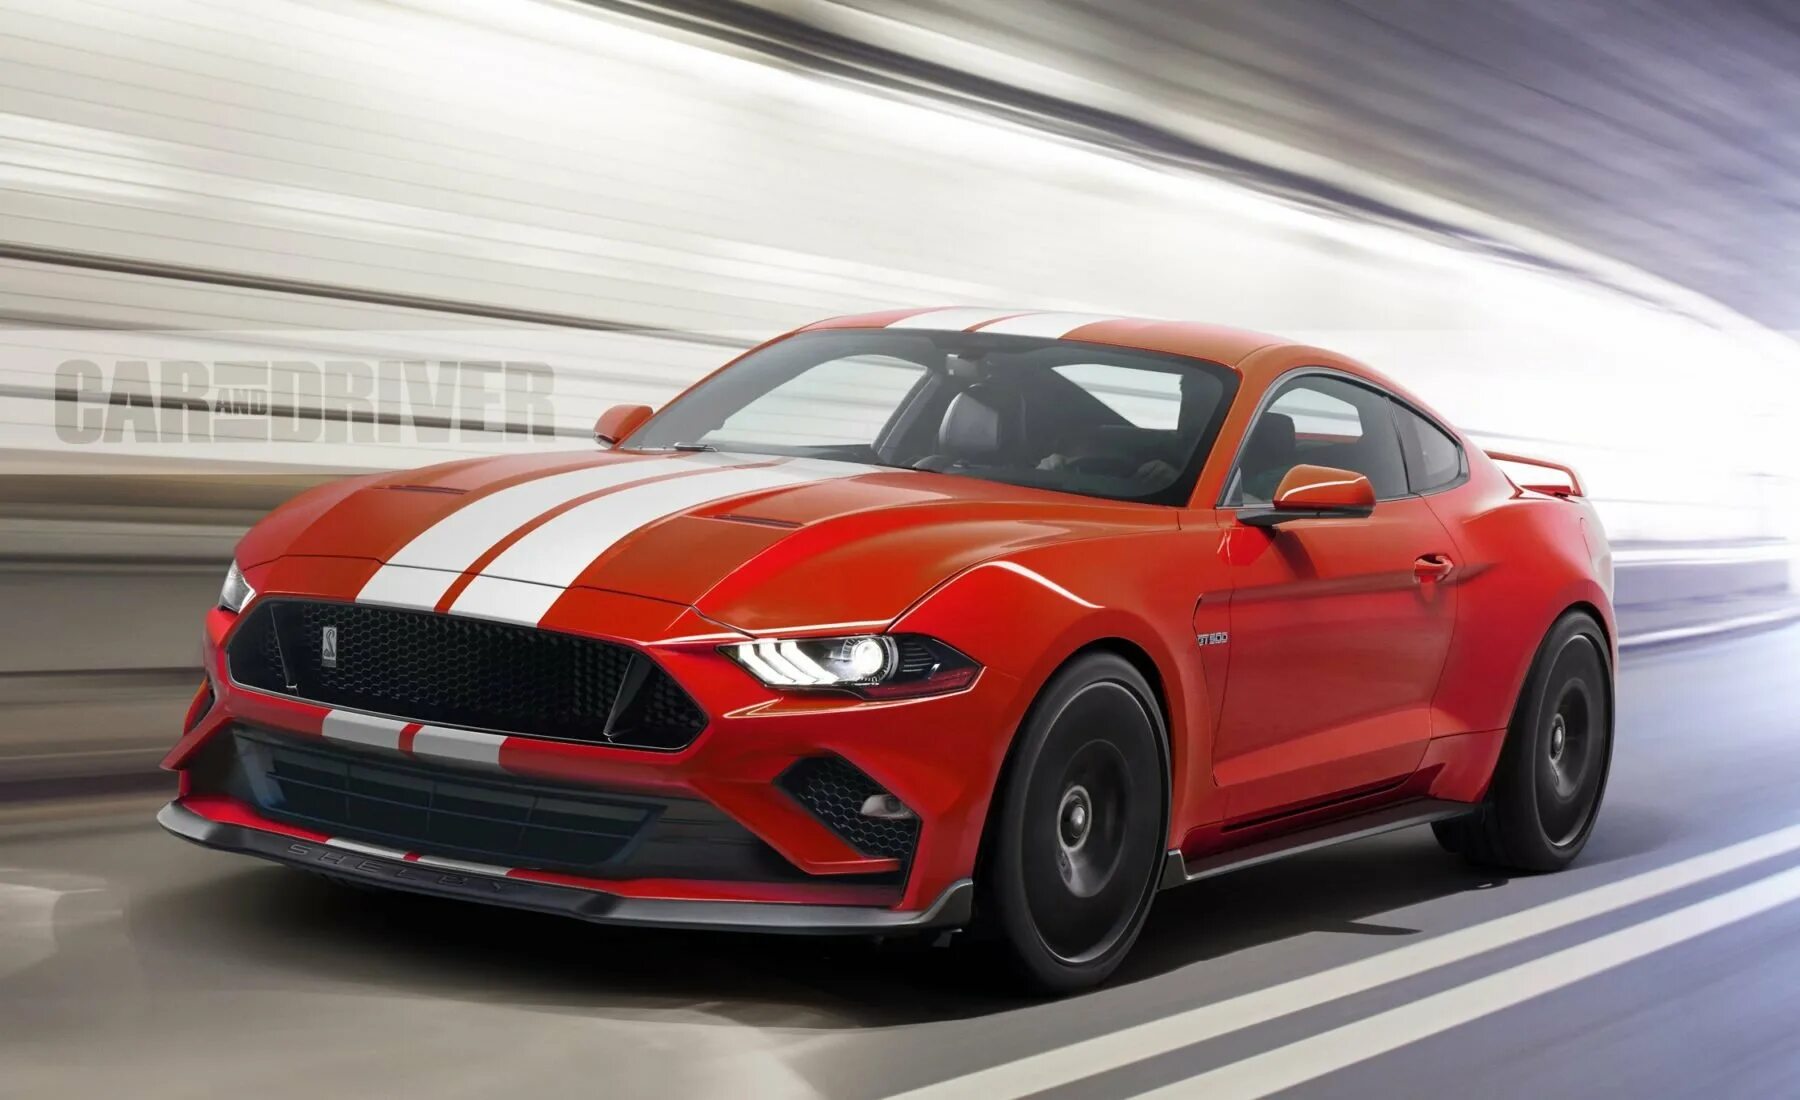 Мустанг джити. Форд Мустанг Шелби gt 500 2019. Форд Мустанг Шелби 2018. Ford Mustang Shelby gt500 2019. Новый Ford Mustang Shelby gt500.